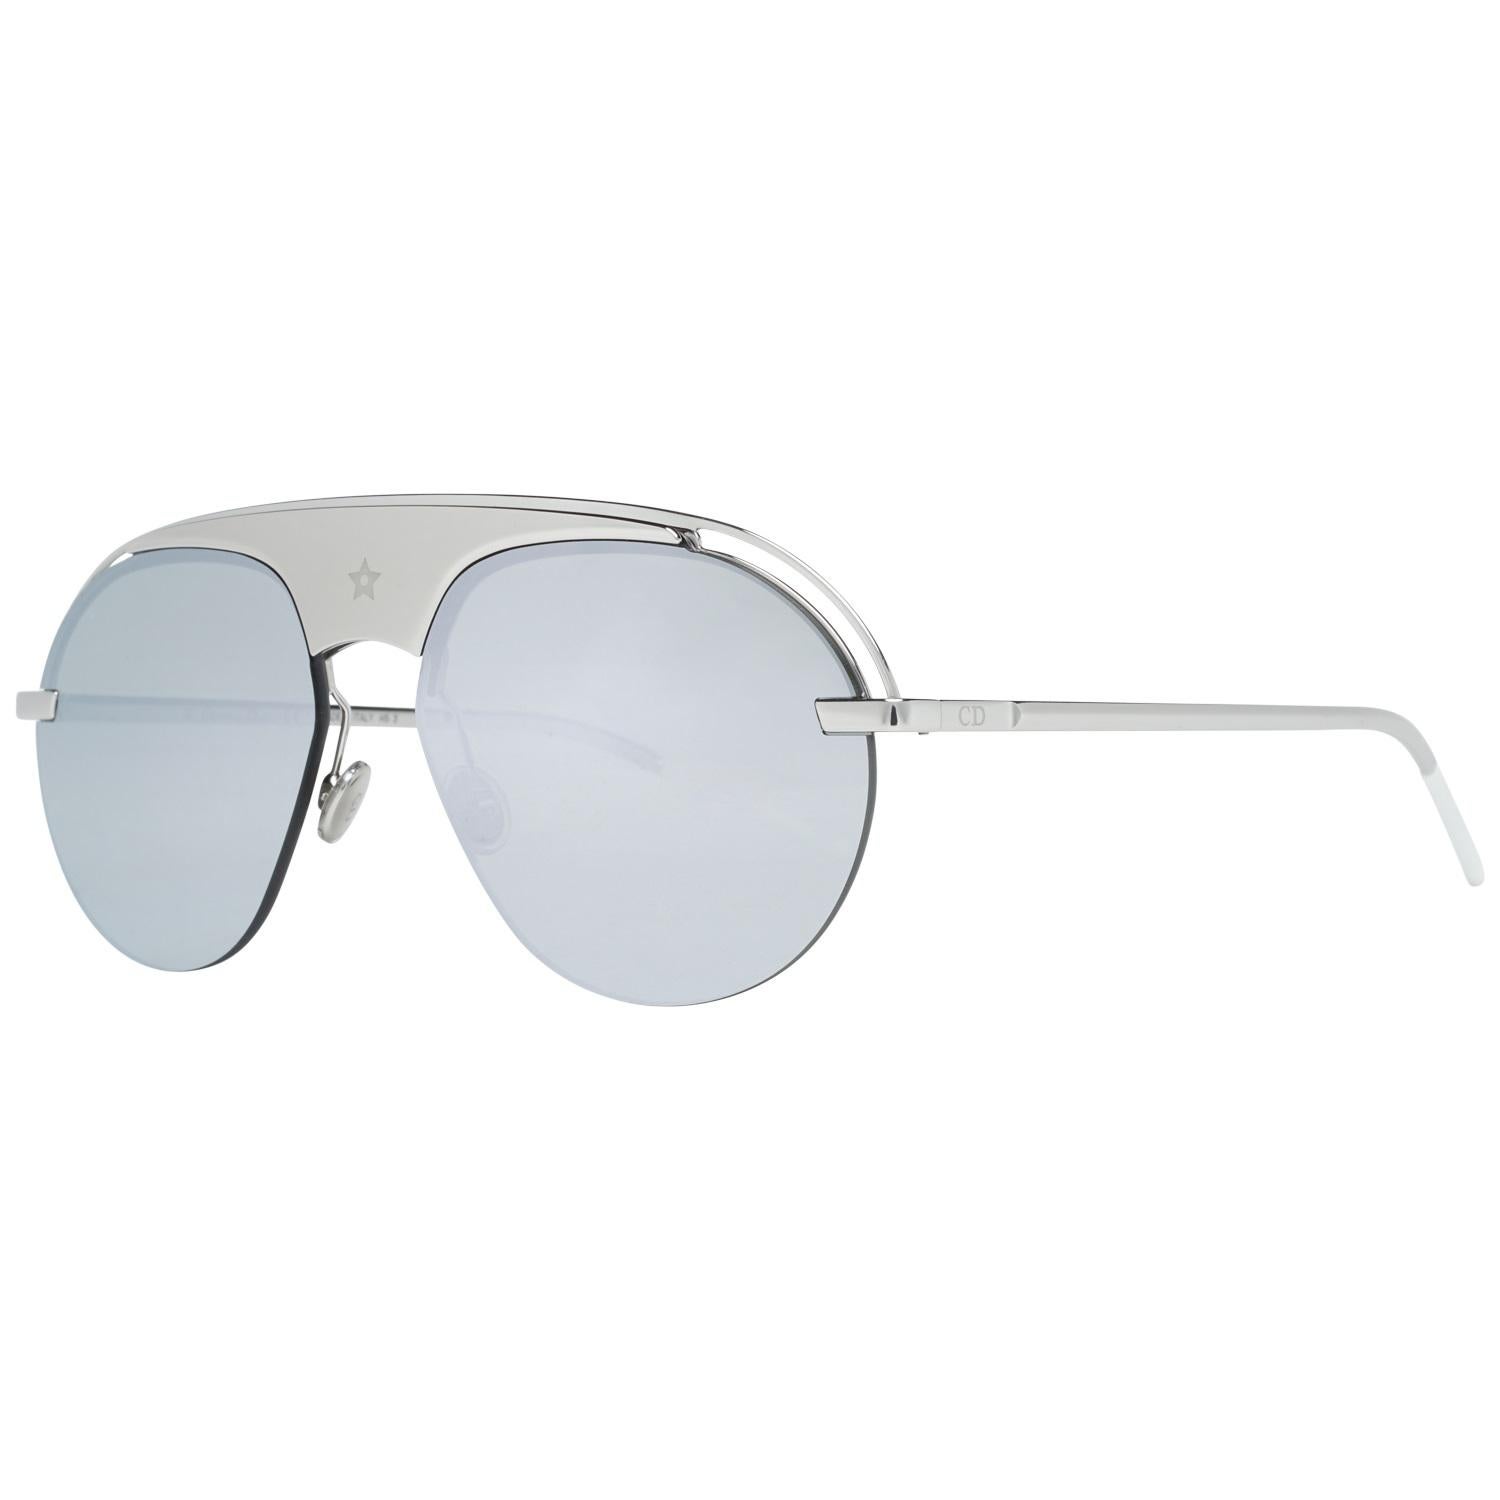 Details

MATERIAL: Metal

COLOR: Silver

MODEL: DIO(R)EVOLUTI2 99010

GENDER: Women

COUNTRY OF MANUFACTURE: Italy

TYPE: Sunglasses

ORIGINAL CASE?: Yes

STYLE: Aviator

OCCASION: Casual

FEATURES: Lightweight

LENS COLOR: Silver

LENS TECHNOLOGY: